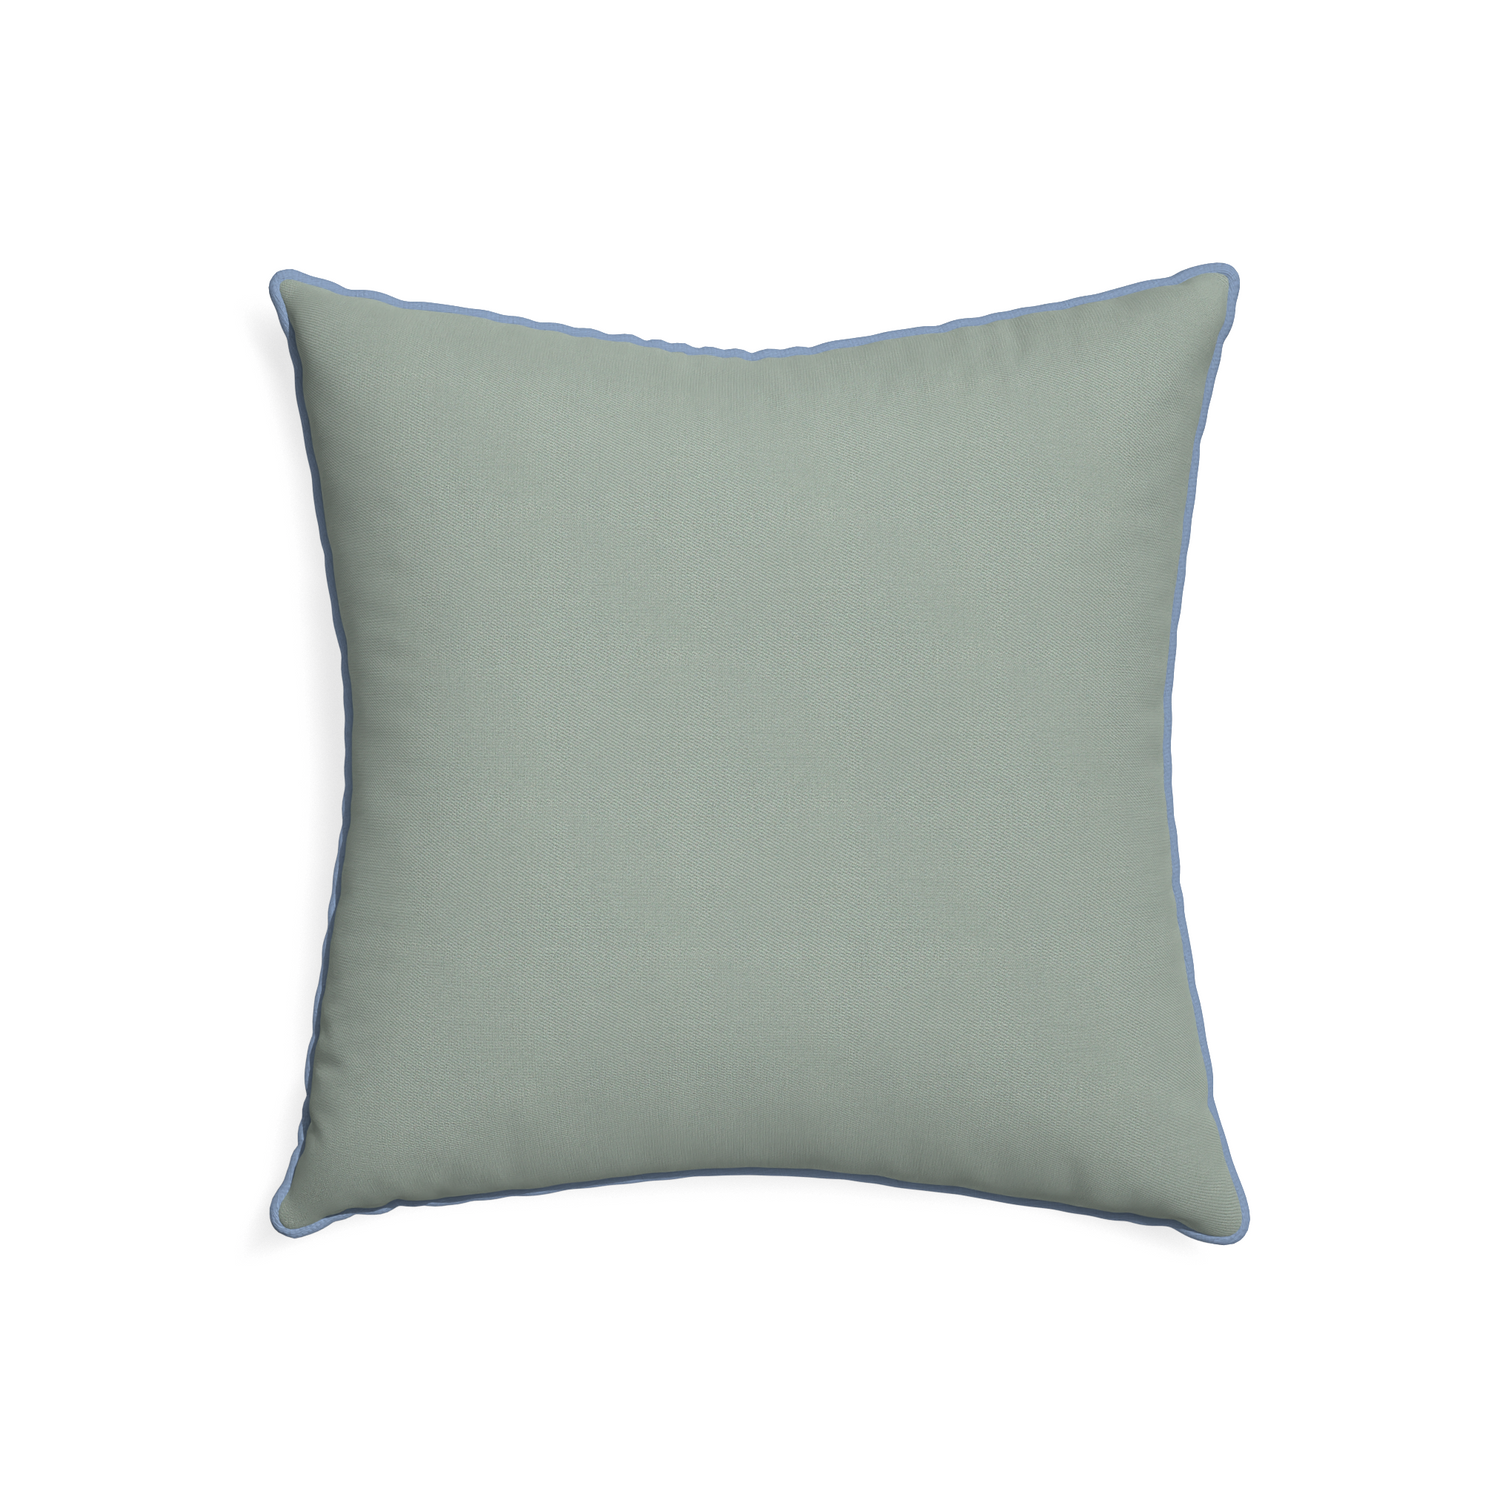 22-square sage custom sage green cottonpillow with sky piping on white background